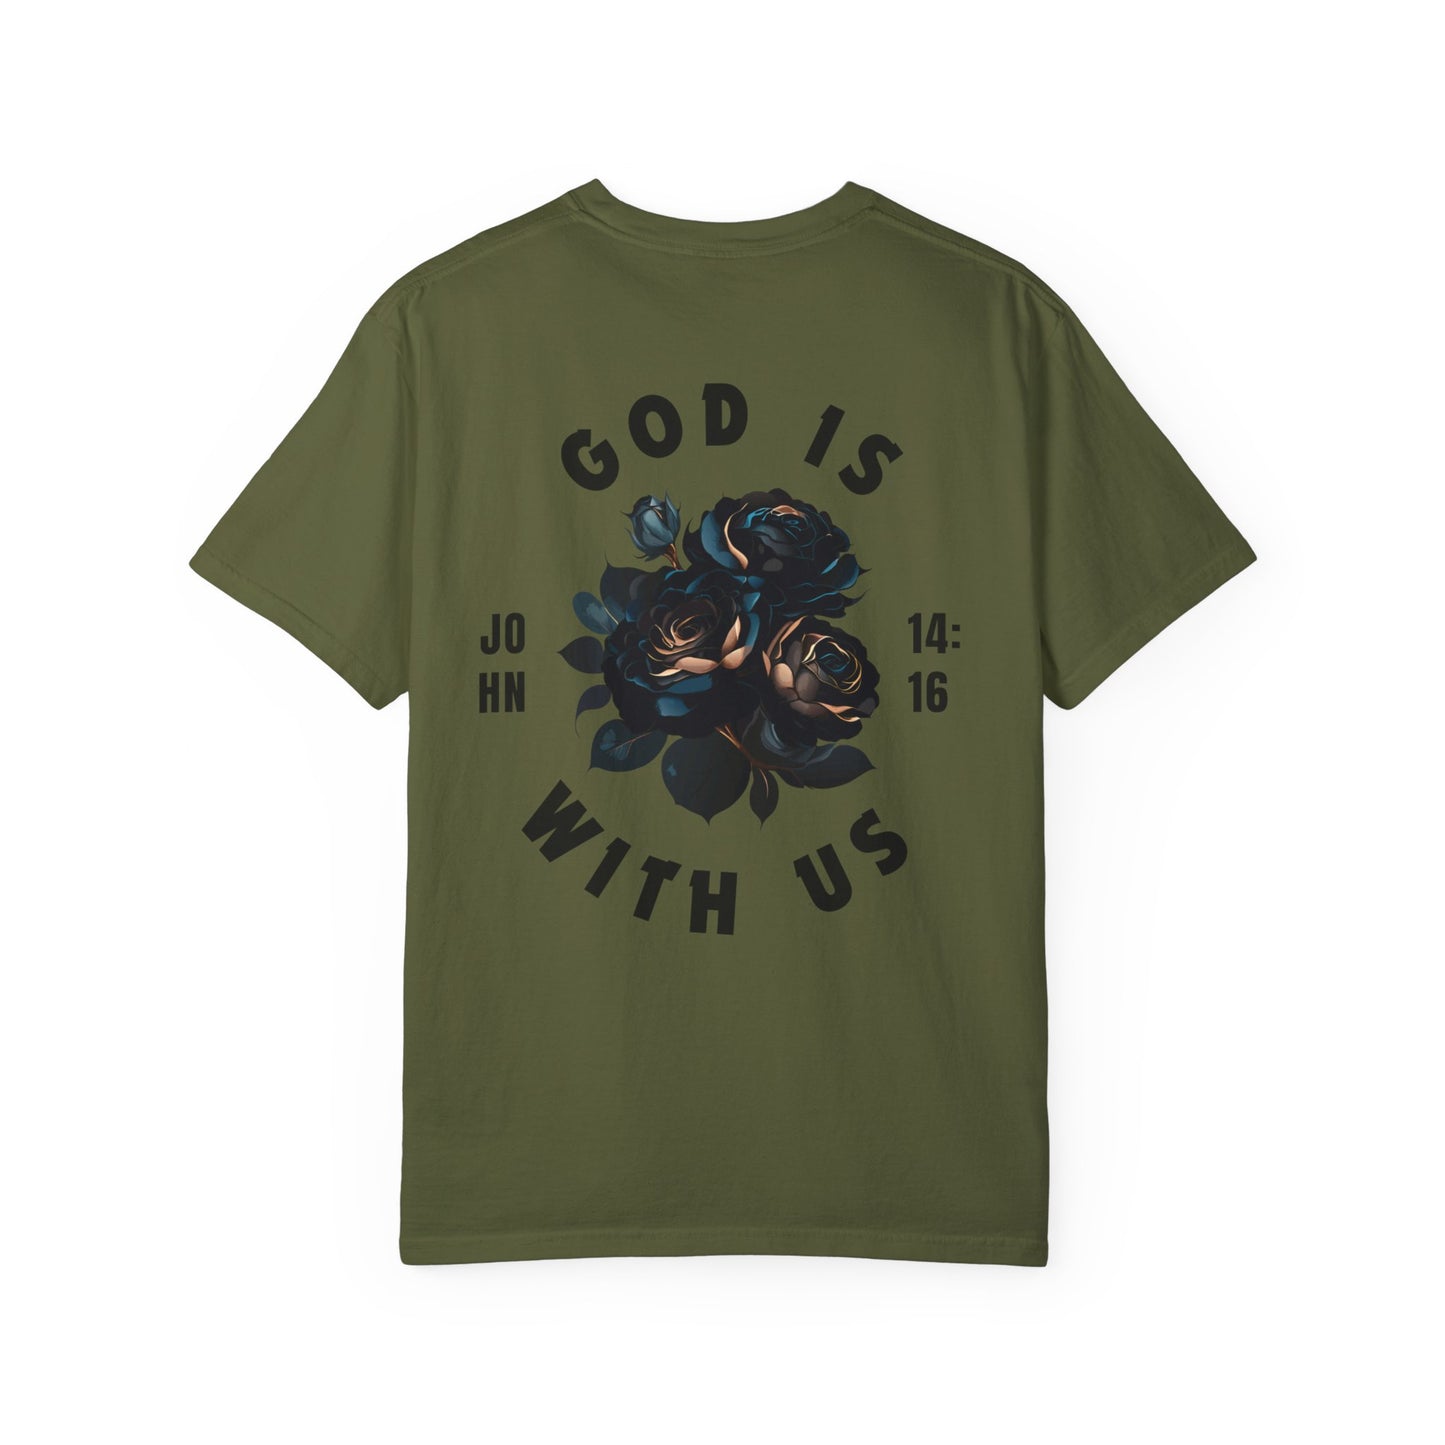 God is with Us Unisex Garment-Dyed T-shirt